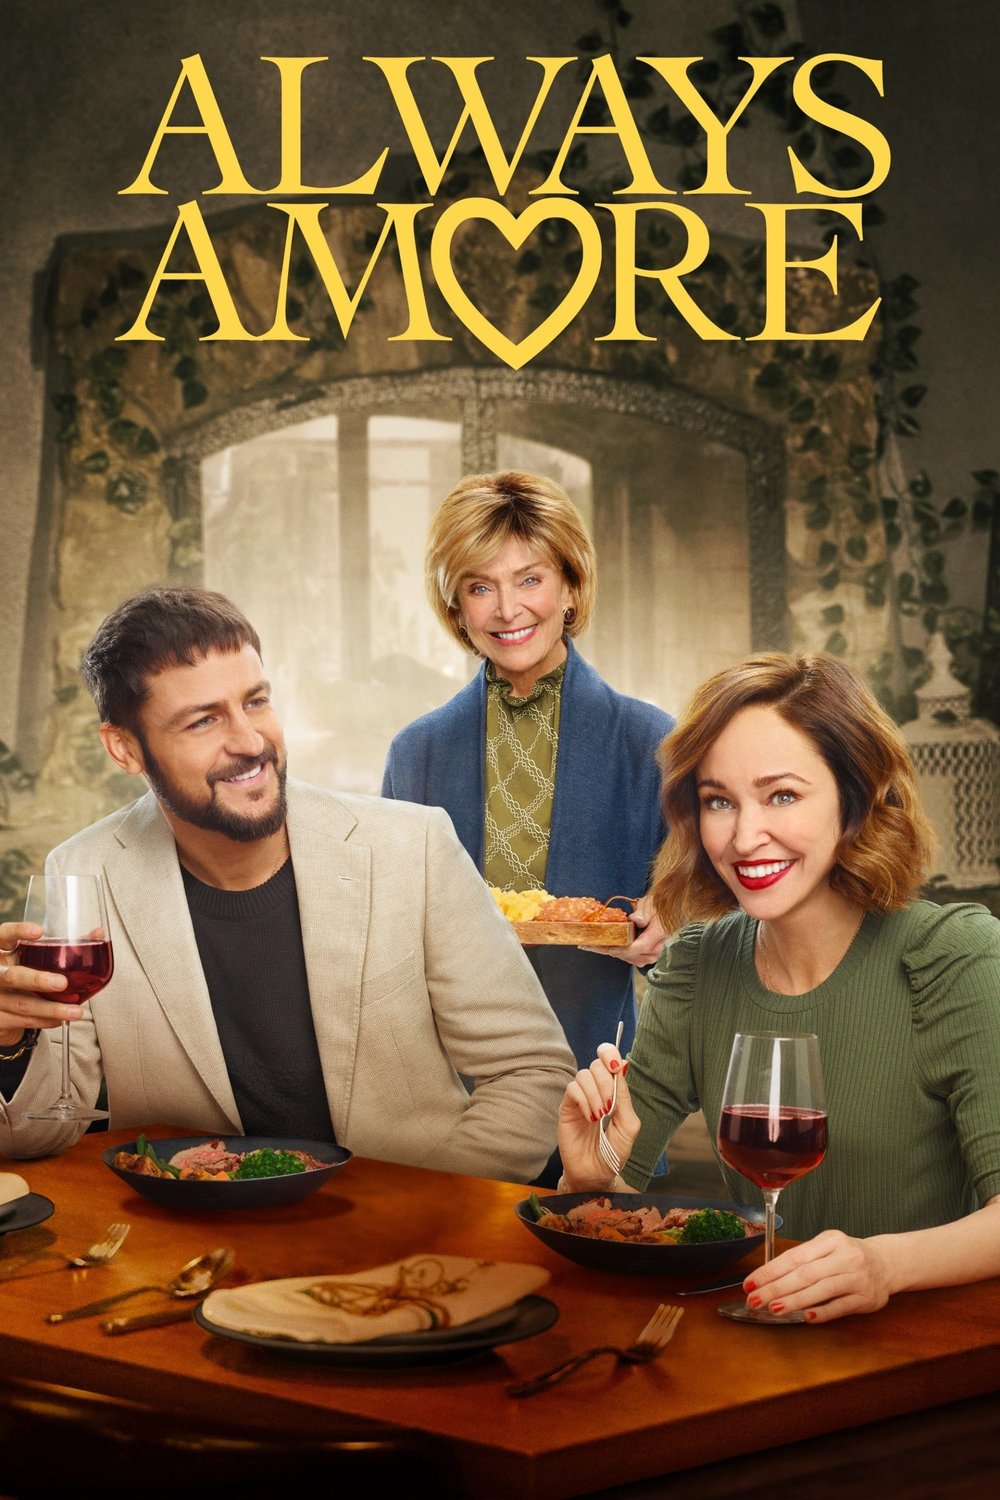 Poster of the movie Always Amore